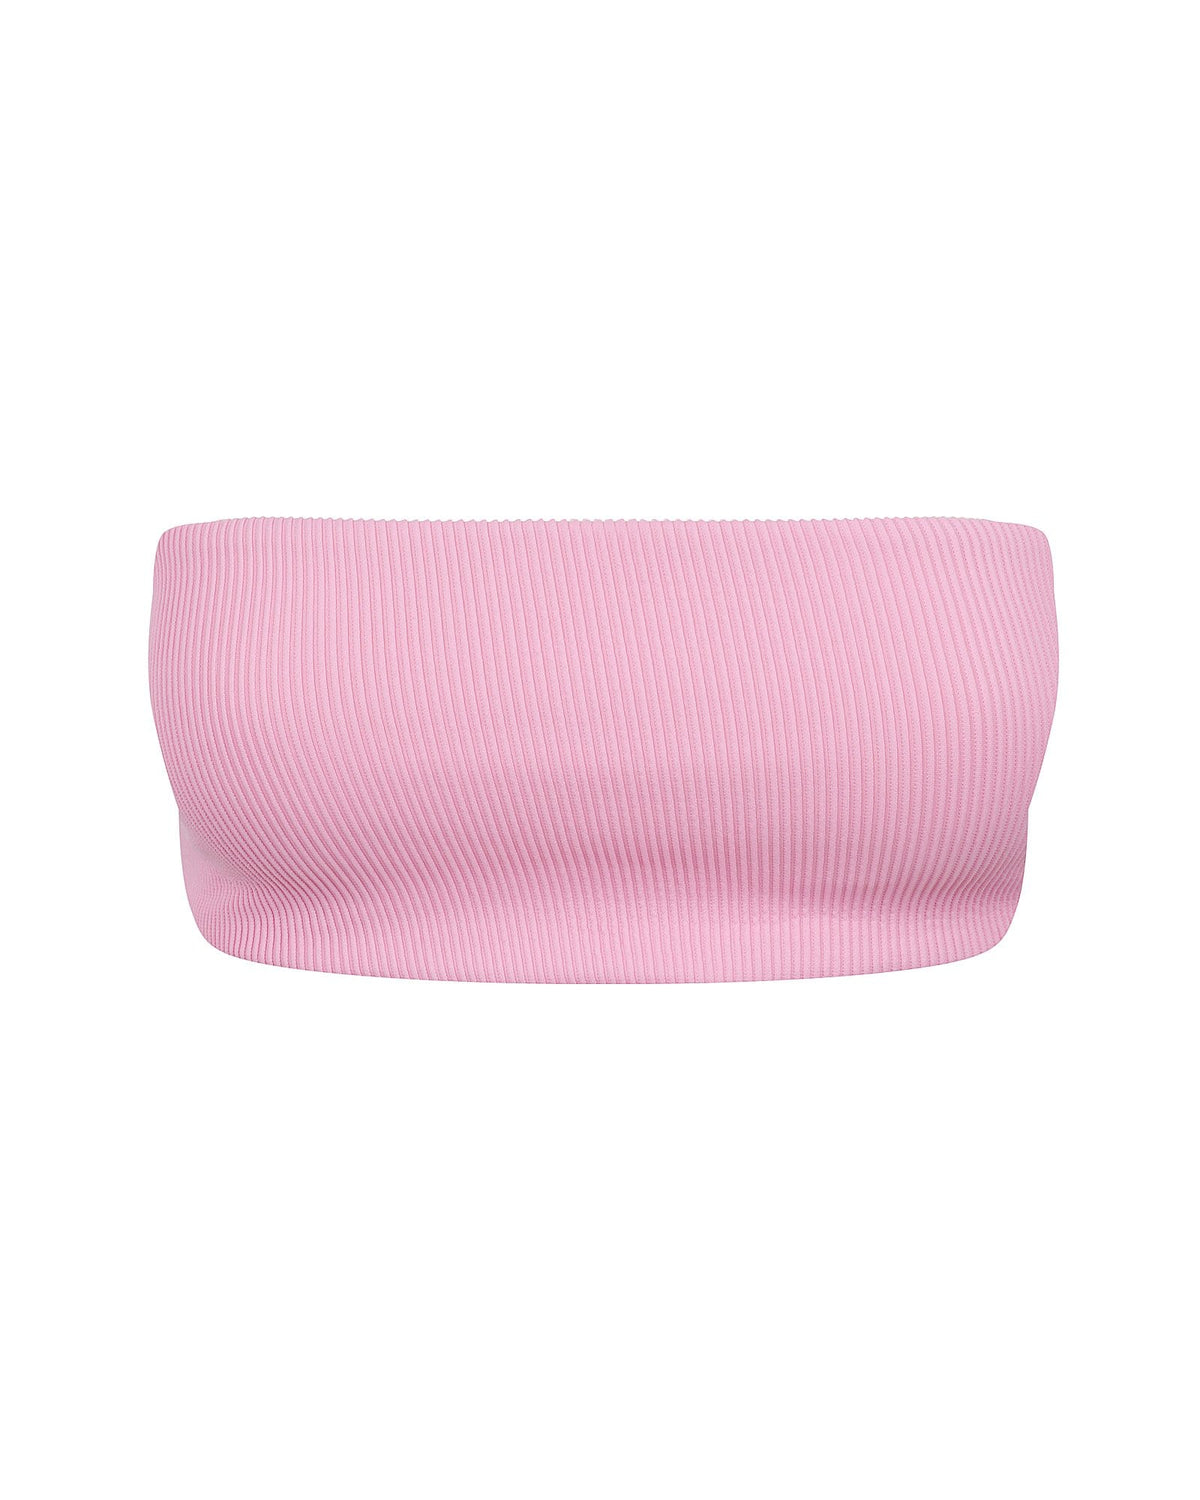 Charlie Holiday Malau Bandeau in Punch